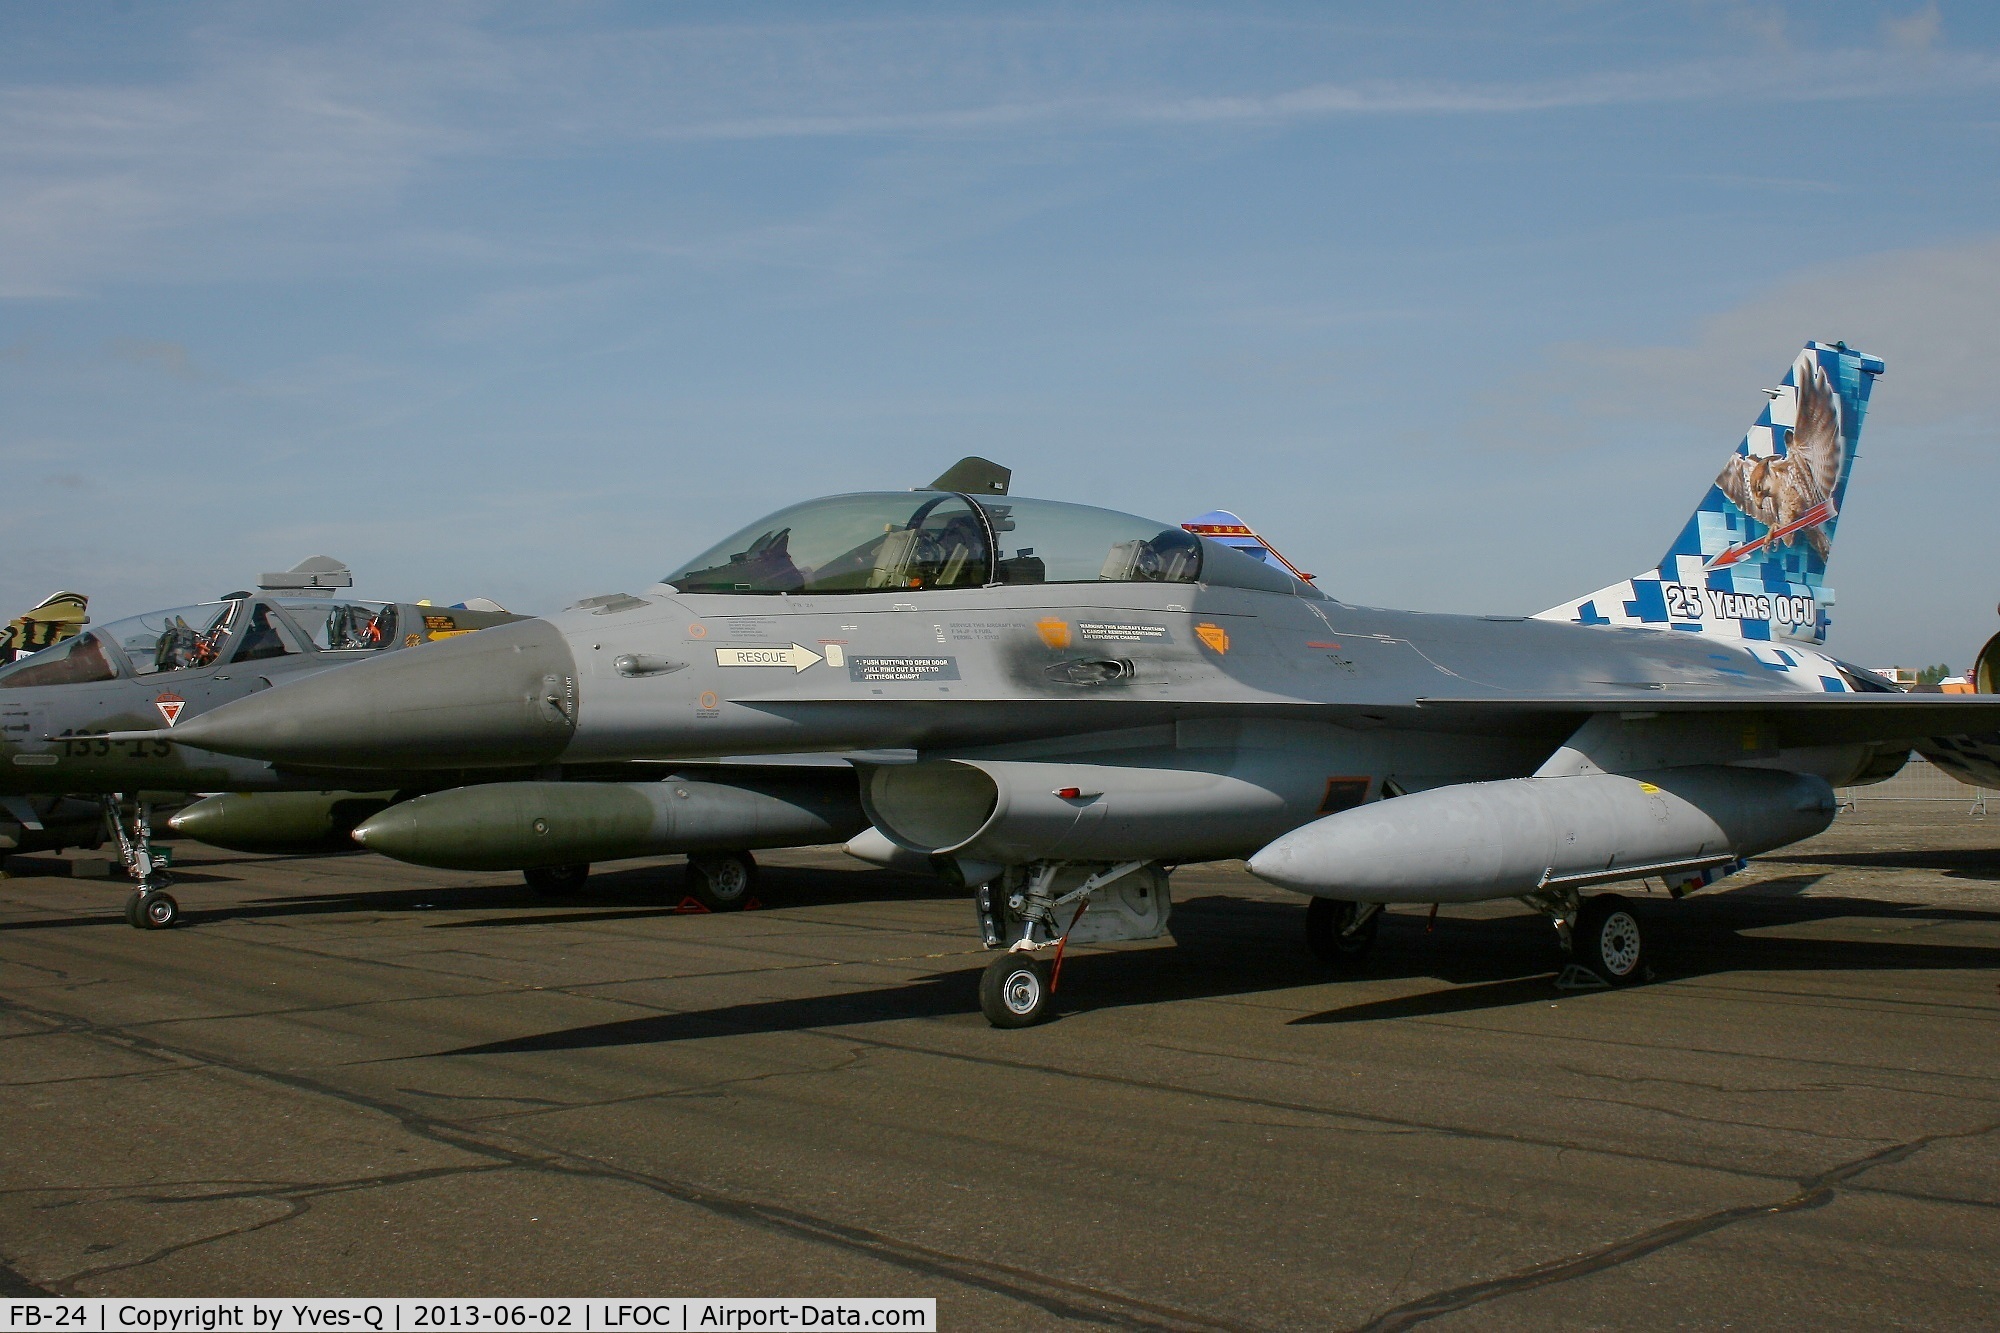 FB-24, General Dynamics F-16BM Fighting Falcon C/N 6J-24, Belgian Air Force General Dynamics F-16BM Fighting Falcon, Chateaudun Air Base 279 (LFOC).  OCU painted up two-seater FB-24 on the occasion of the OCU's (Operational Conversion Unit)15th anniversary.